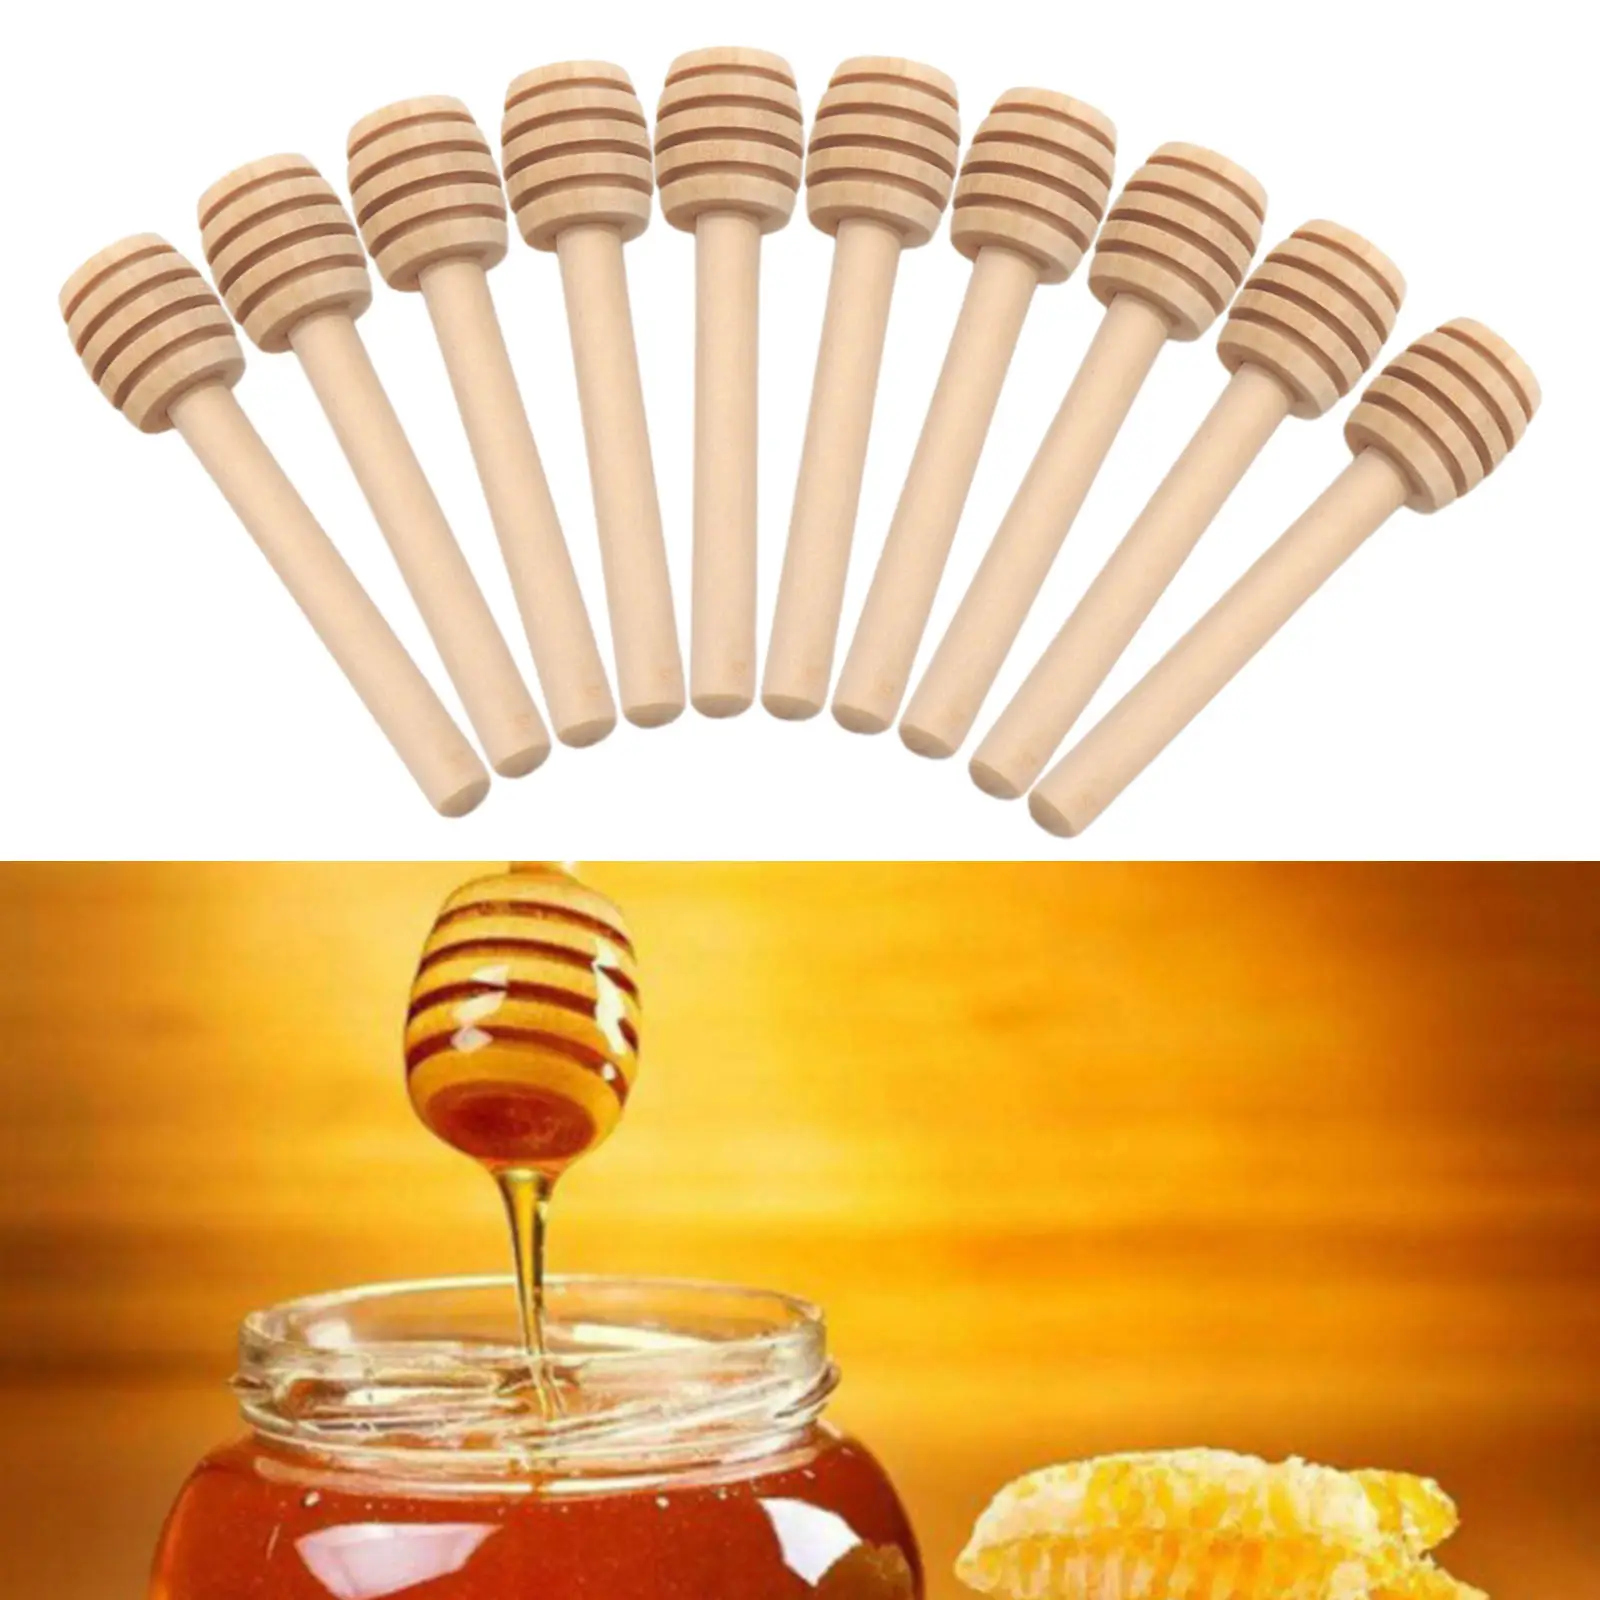 3 Inch Wooden Honey Dippers Server for Honey Jar Dispense Drizzle Honey and Wedding Party Favors Hjuns 24 Pack Mini Wood Honey Dipper Sticks 